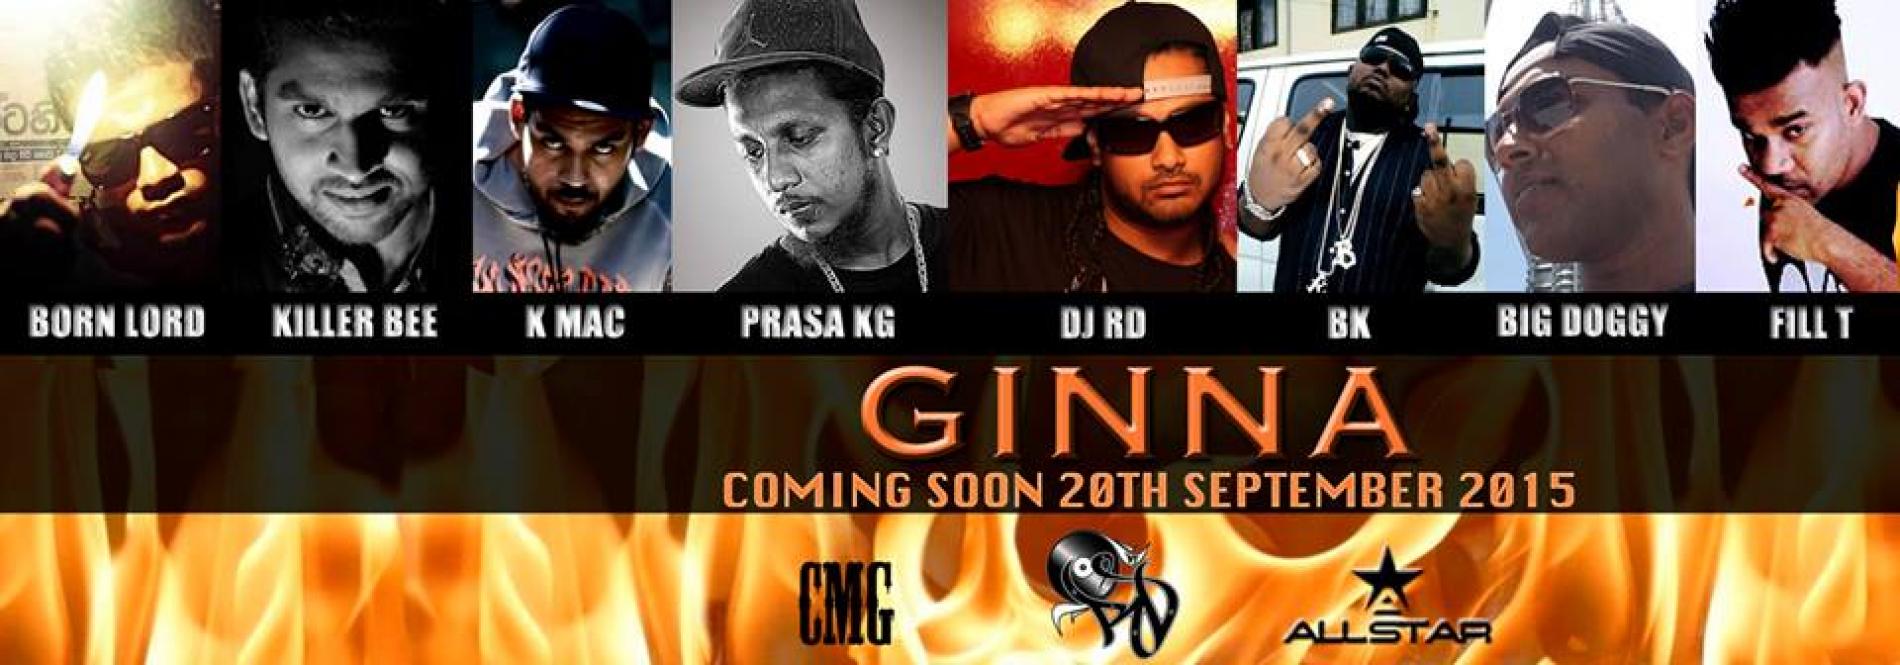 That Monster Sinhala Rap Collaba “Ginna” Is Out